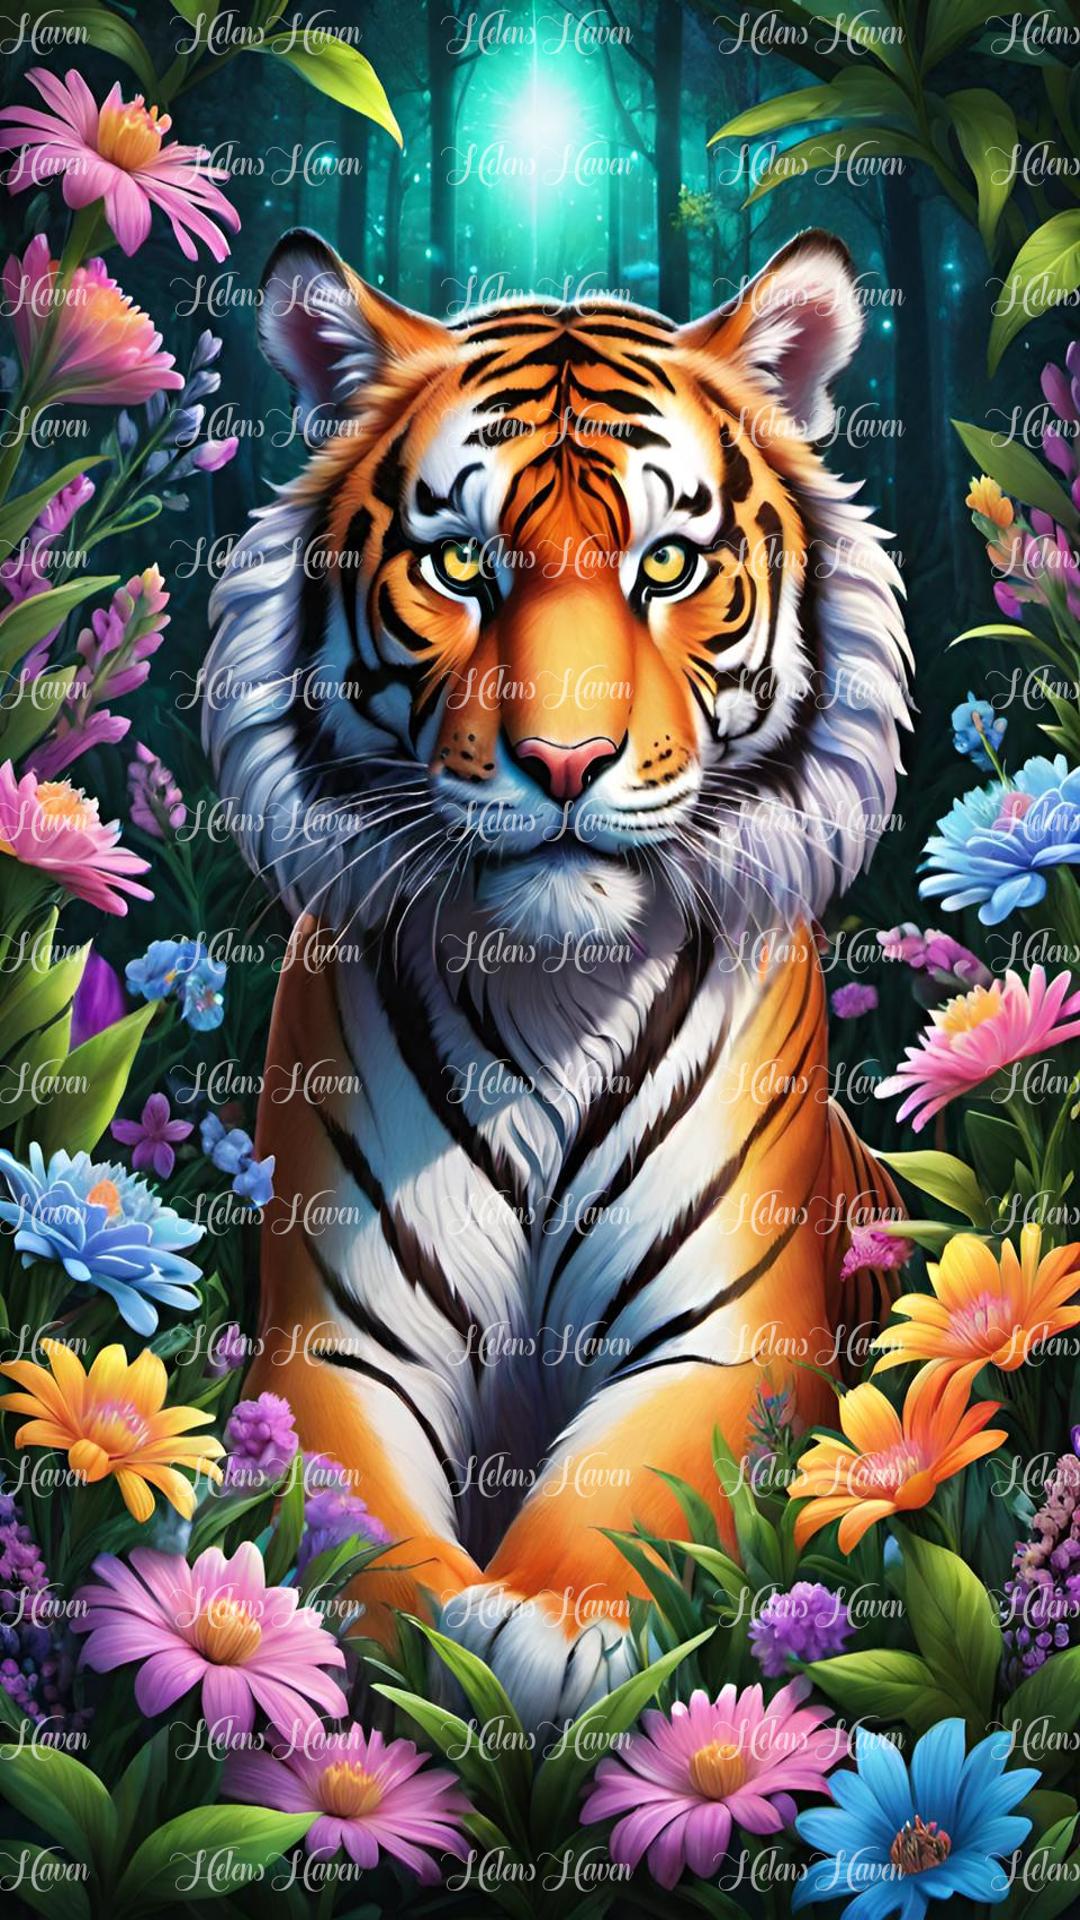 Tiger amid flowers in a forest at night